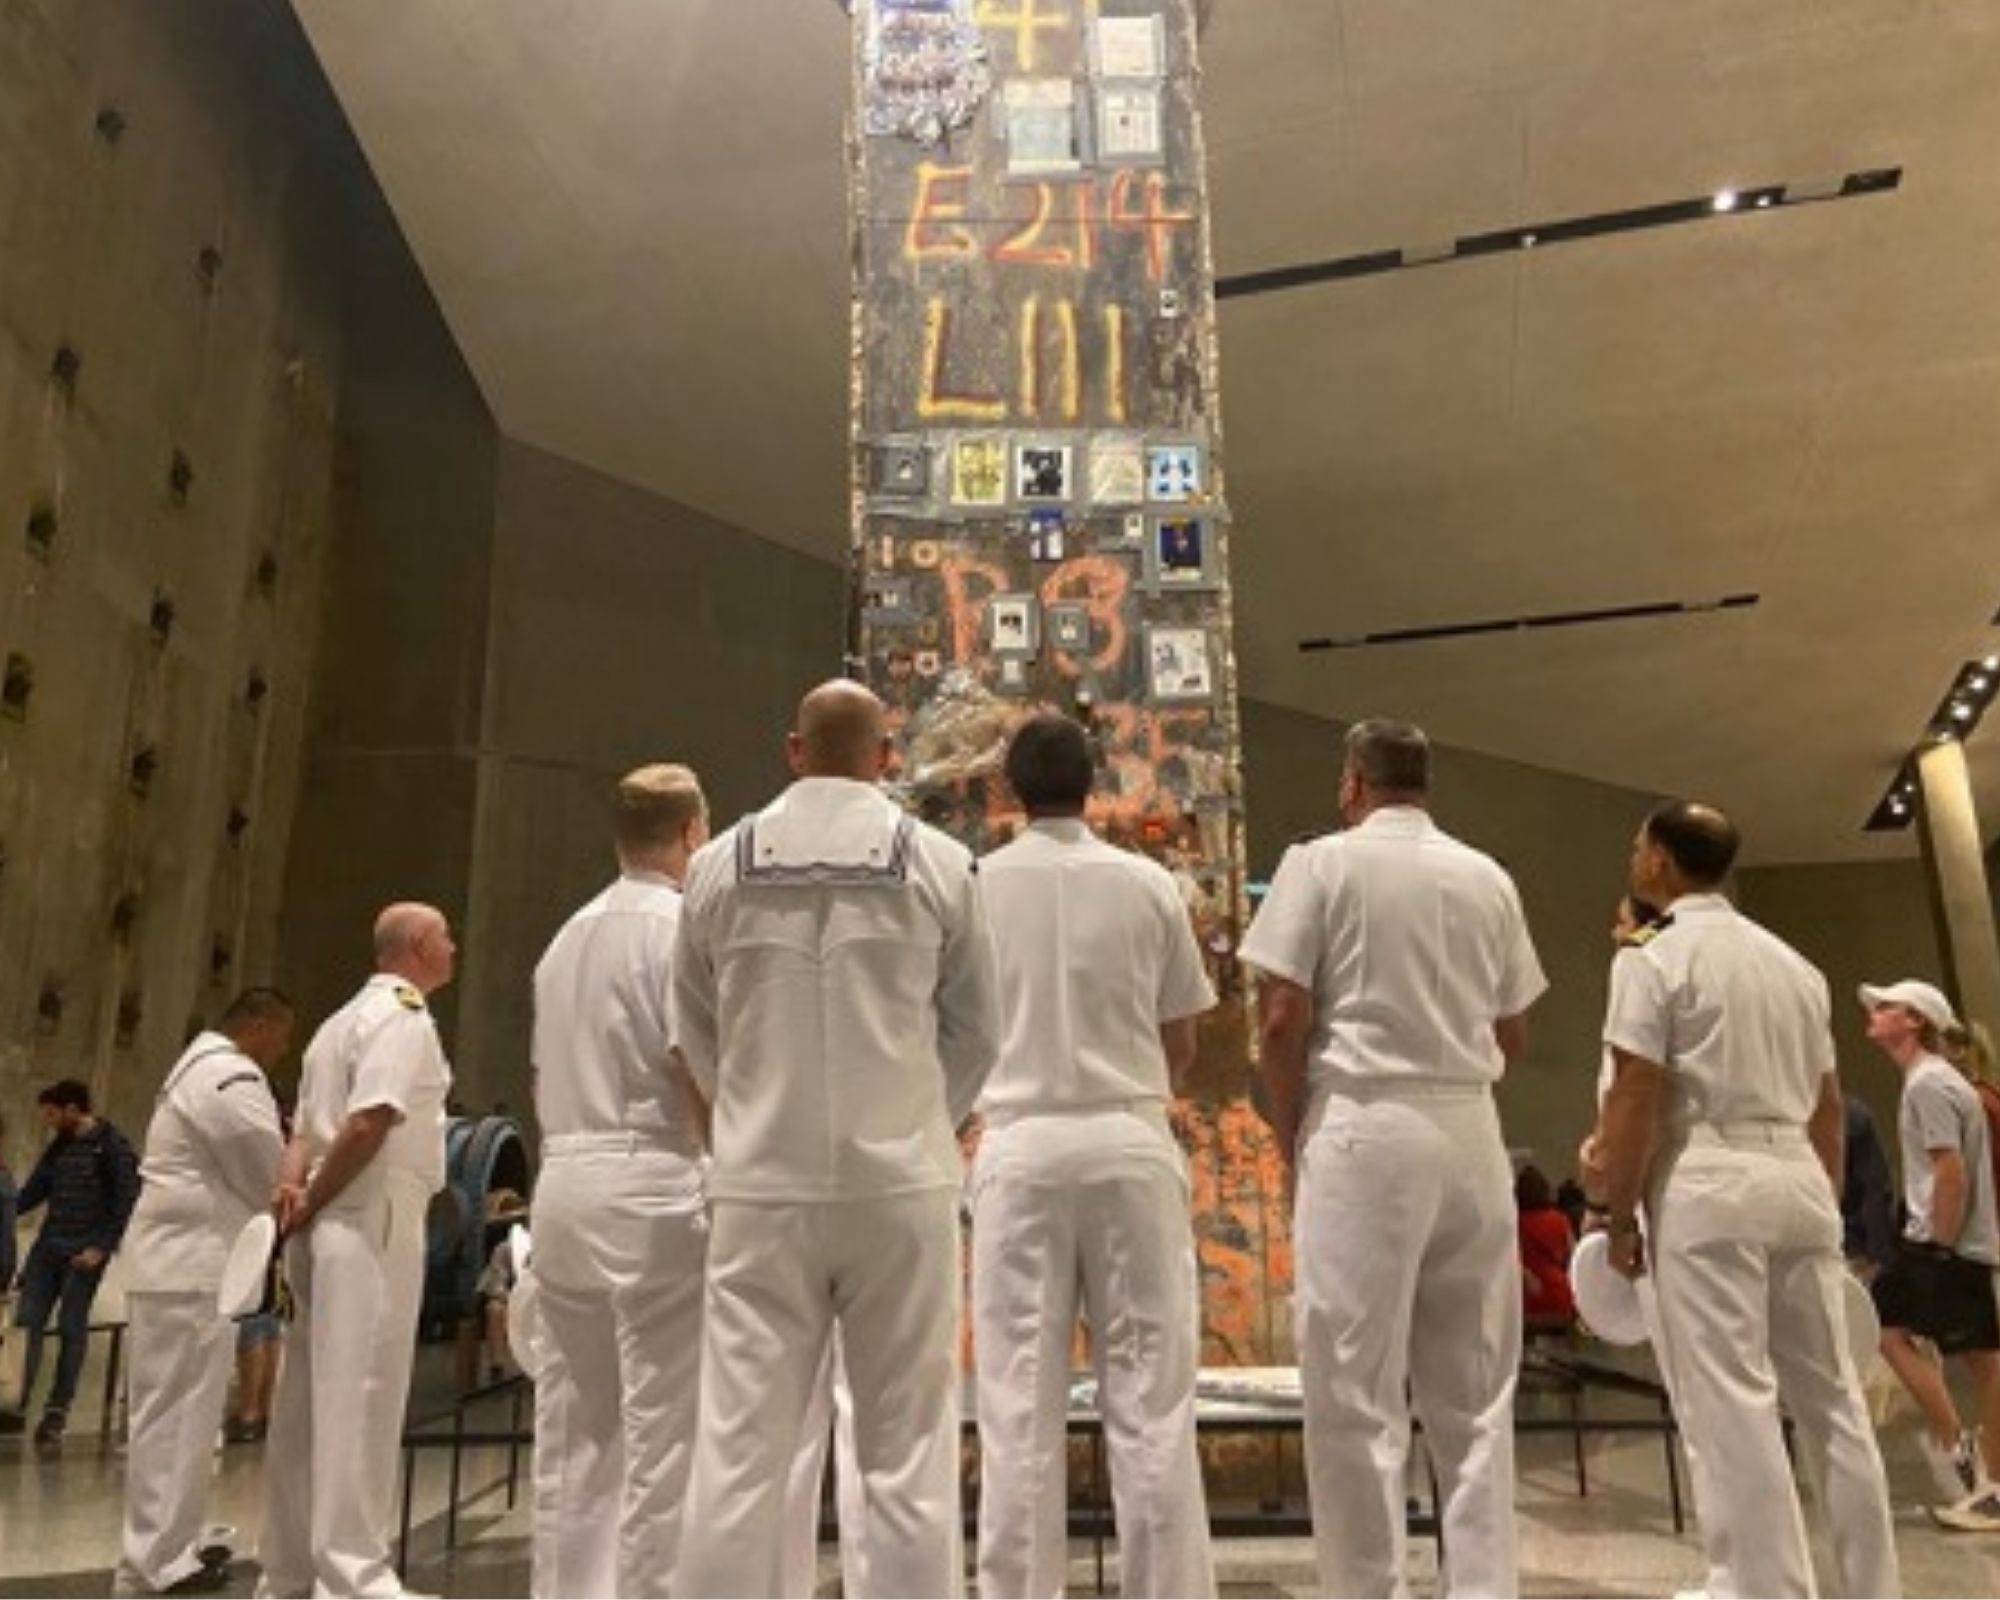 Back view of sailors in white uniforms looking up at Last Column in the Museum